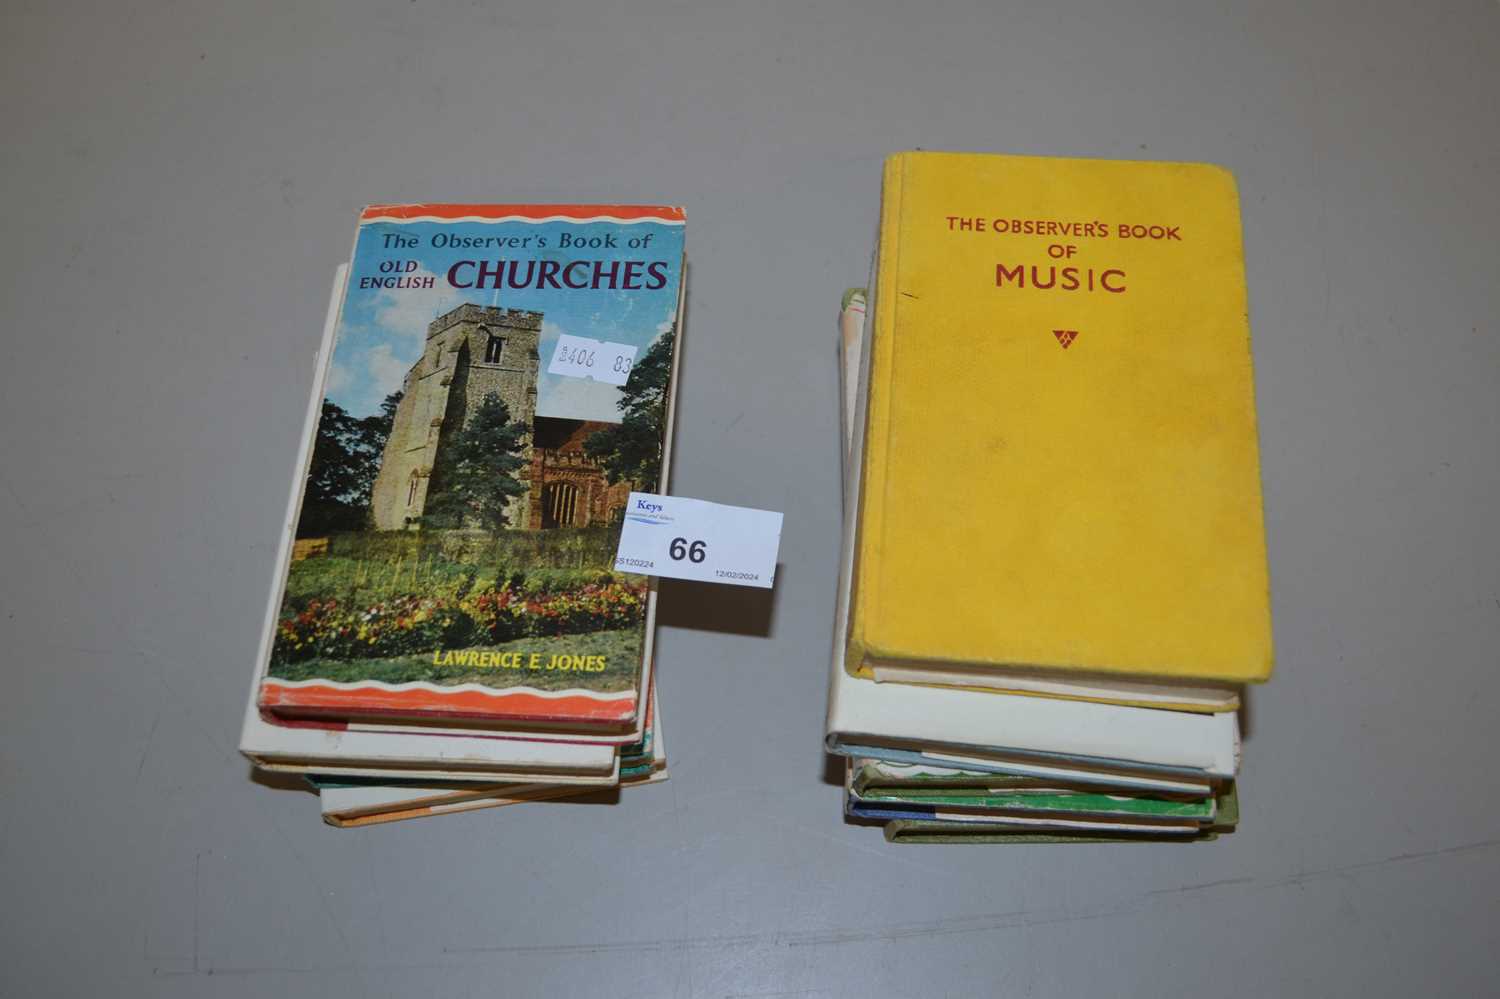 Group of Observers books